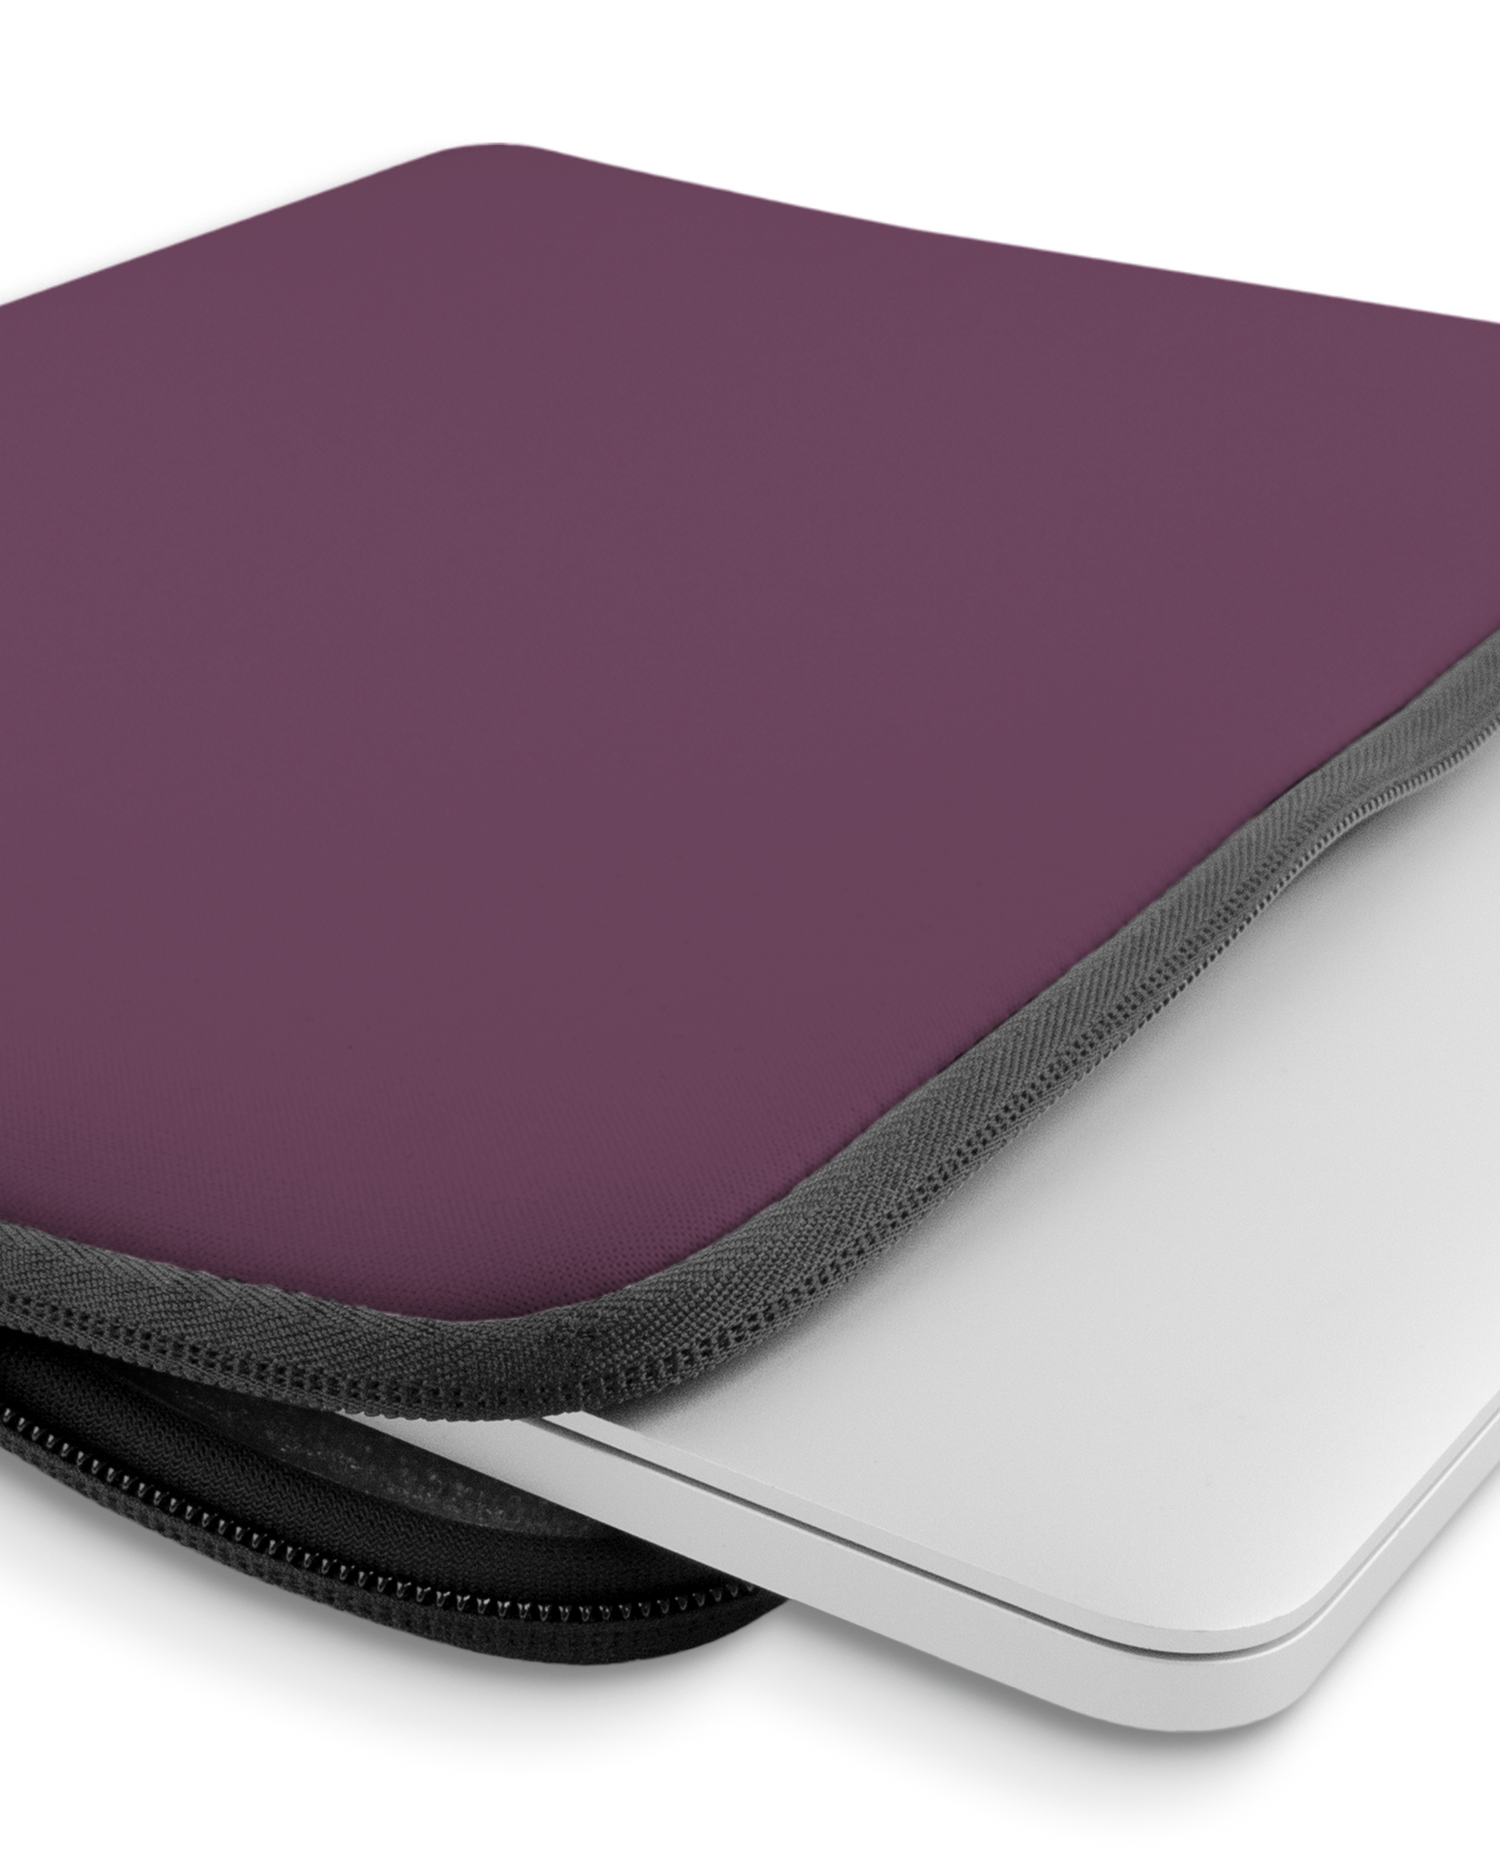 PLUM Laptop Case 14 inch with device inside